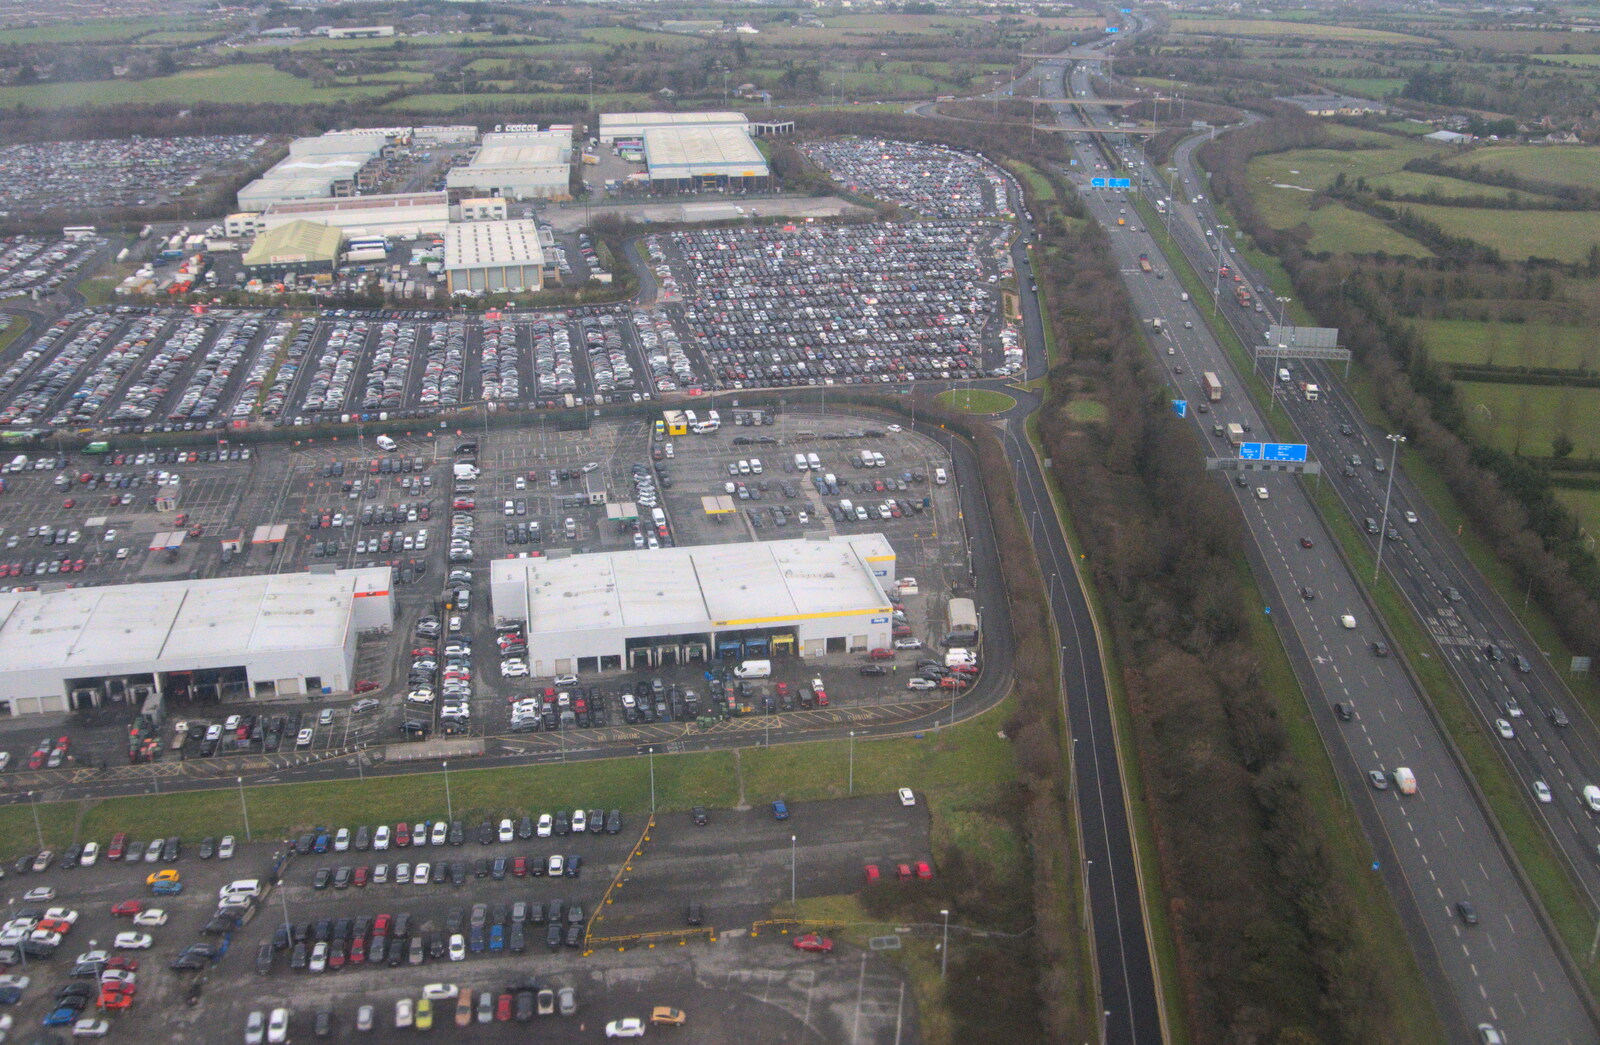 Blackrock North and Newgrange, County Louth, Ireland - 16th February 2023: The M1 motorway outside Dublin airport